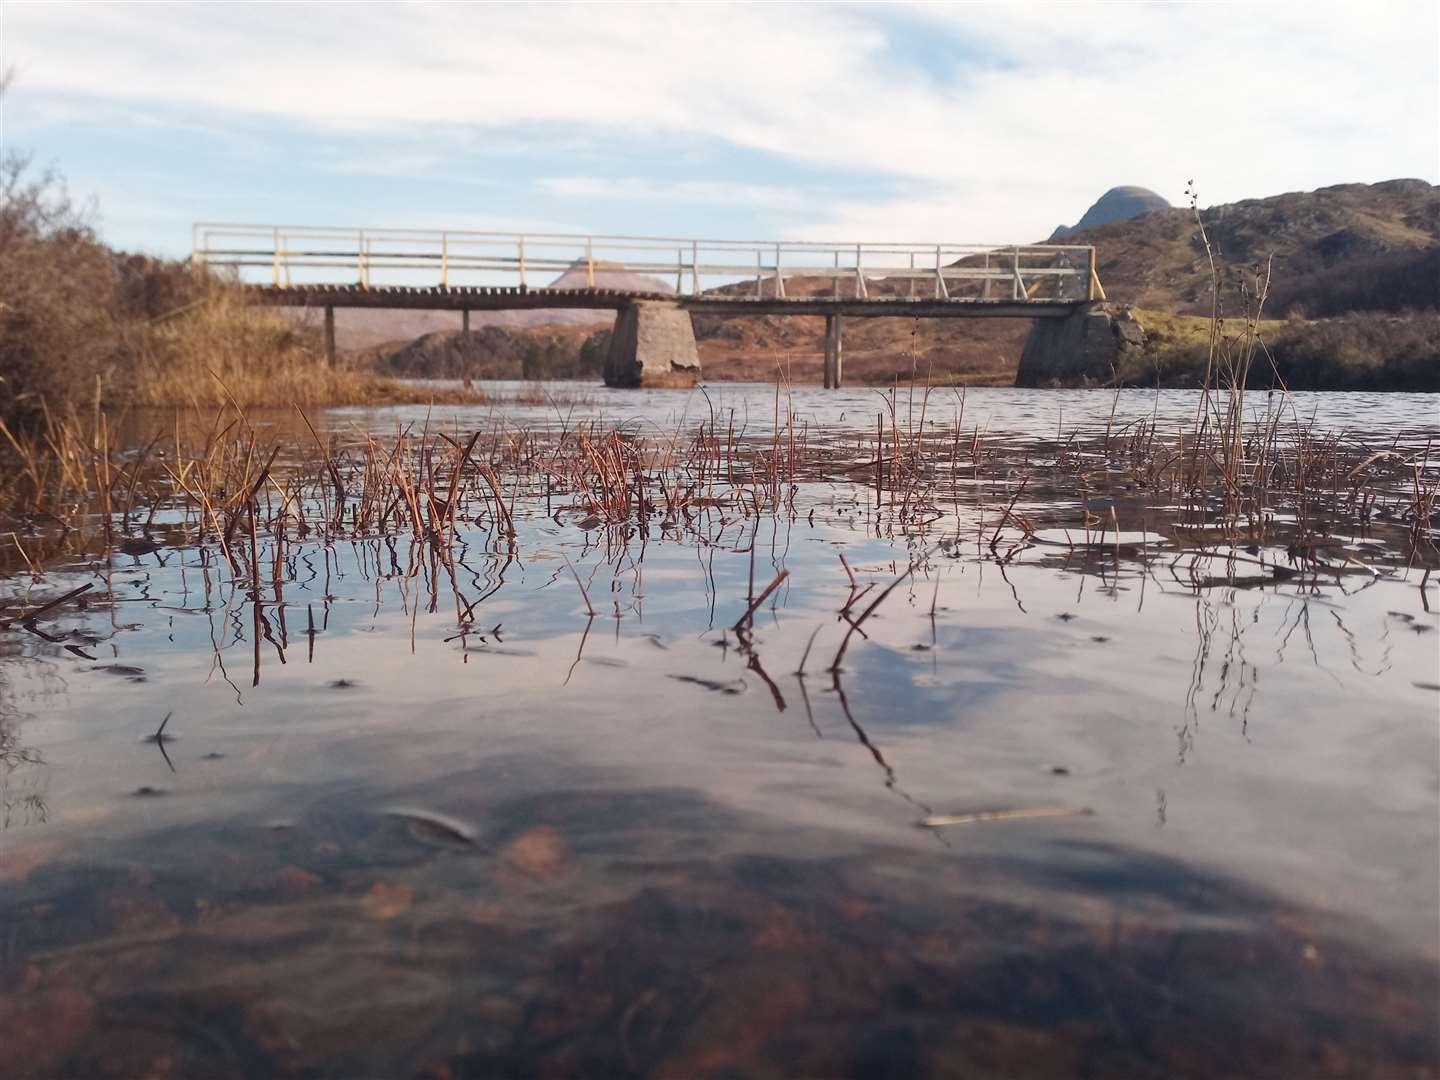 The bridge is one of only four designated access points directly onto the Assynt Foundation’s 44,000 acre landholding. Picture: Boyd Alexander/Scottish Wildlife Trust